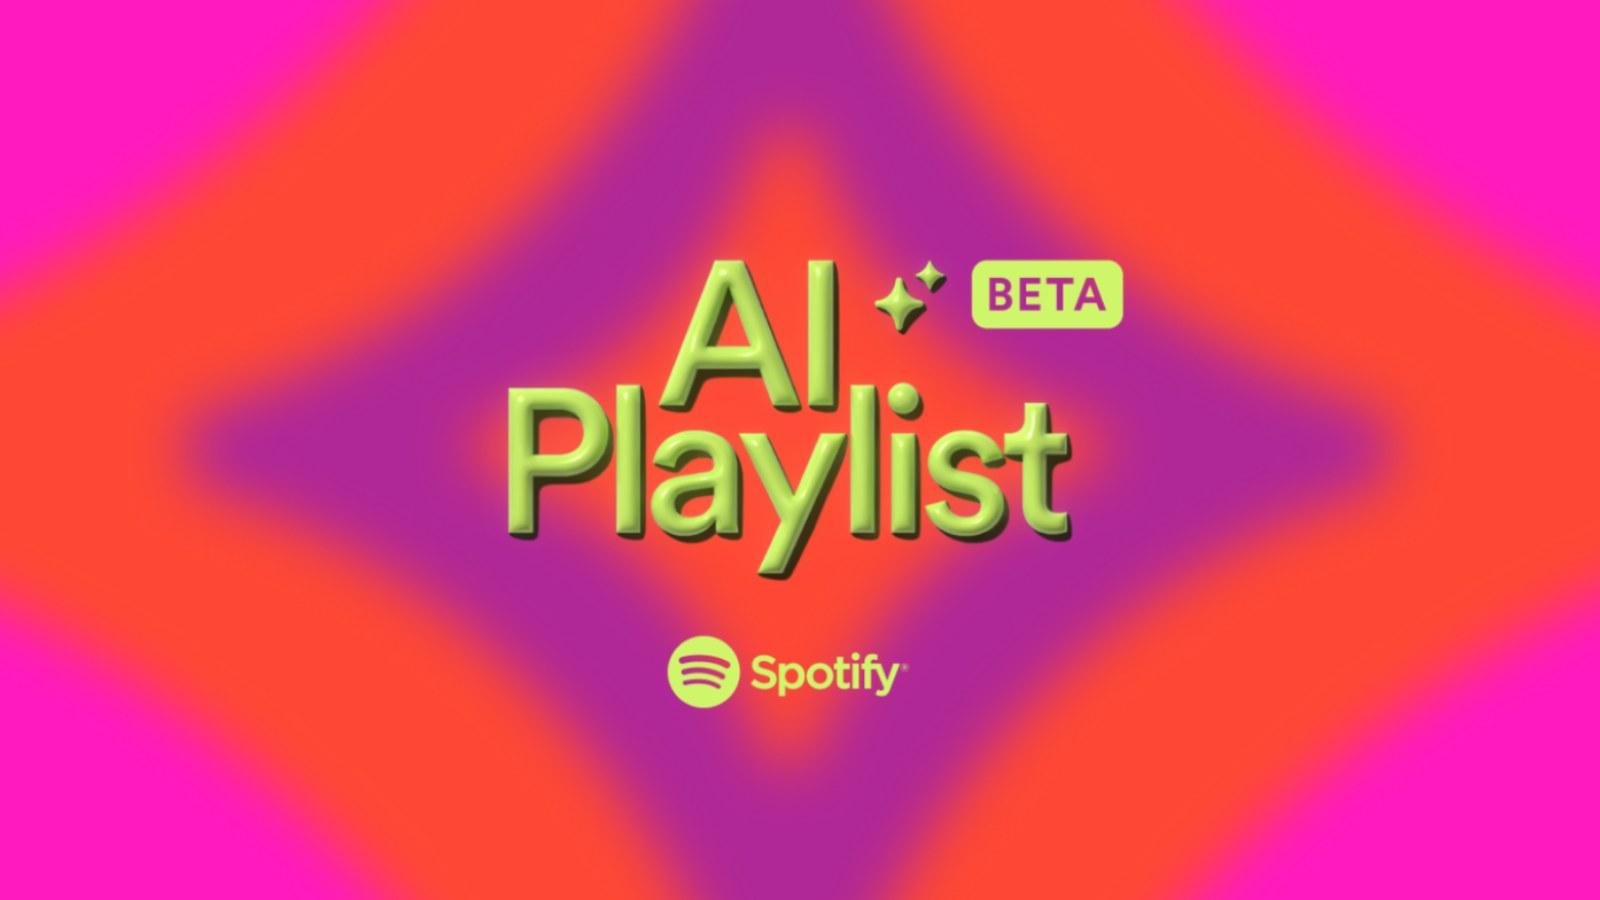 Spotify AI playlist beta in green with colorful pink and orange lettering